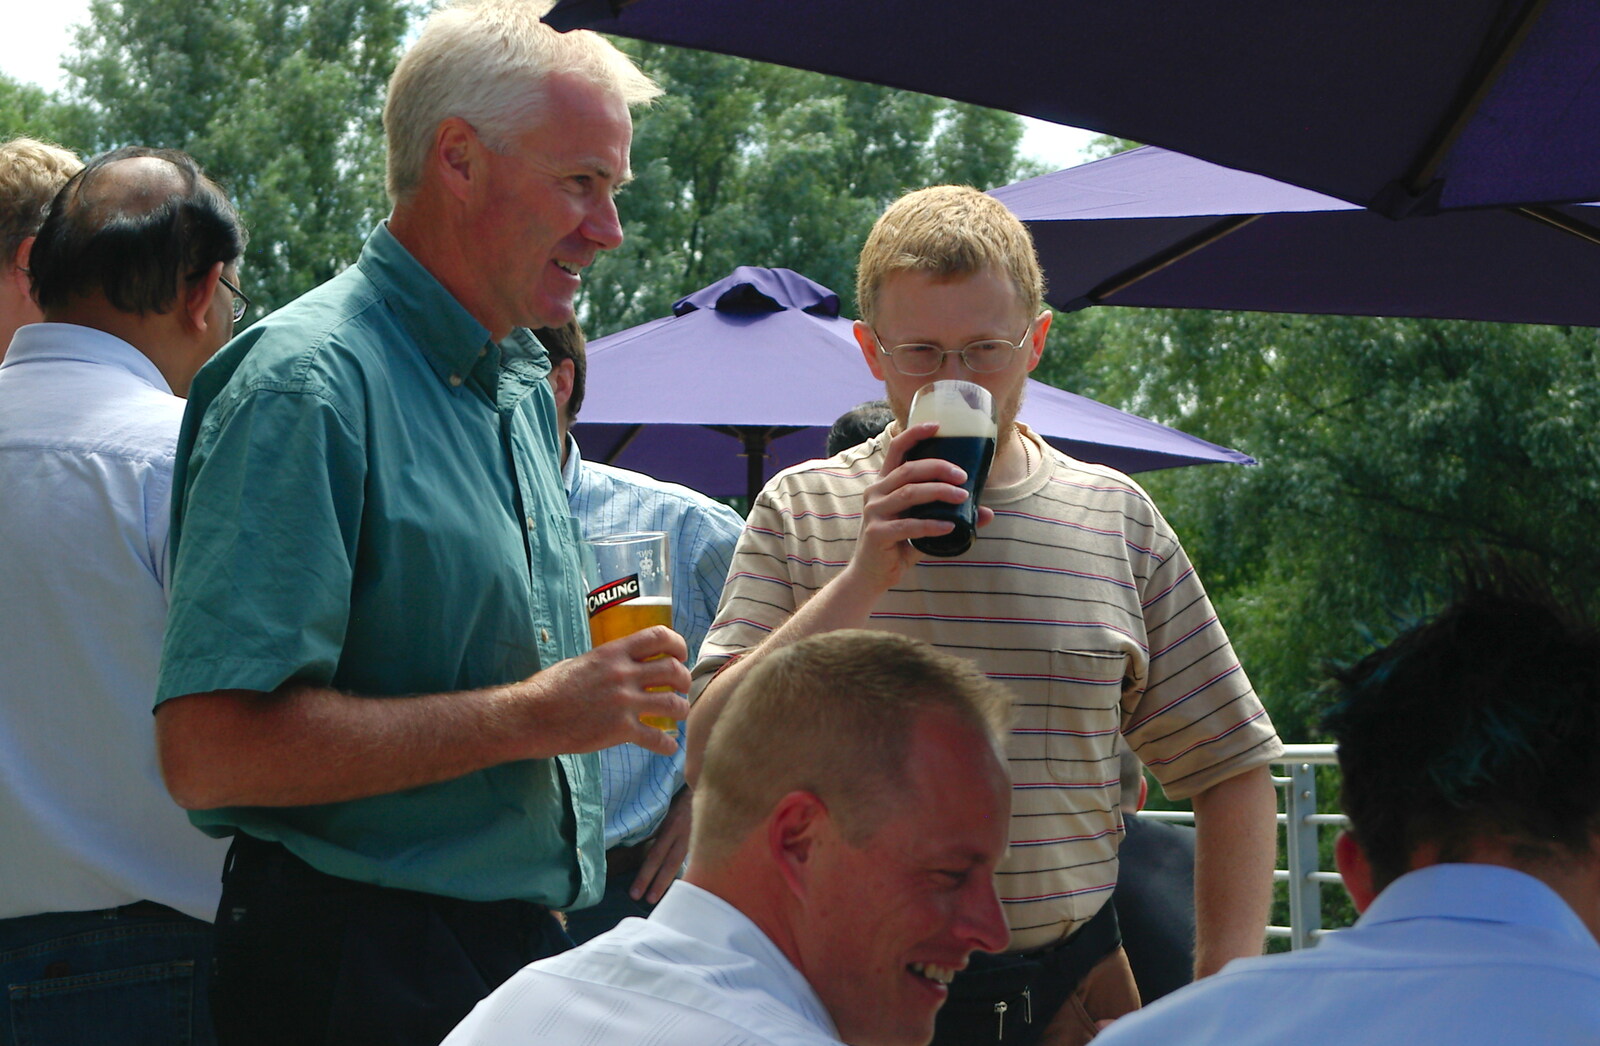 Steve Hunt's got a beer from Steve Ives' Leaving Lunch, Science Park, Cambridge - 11th July 2005